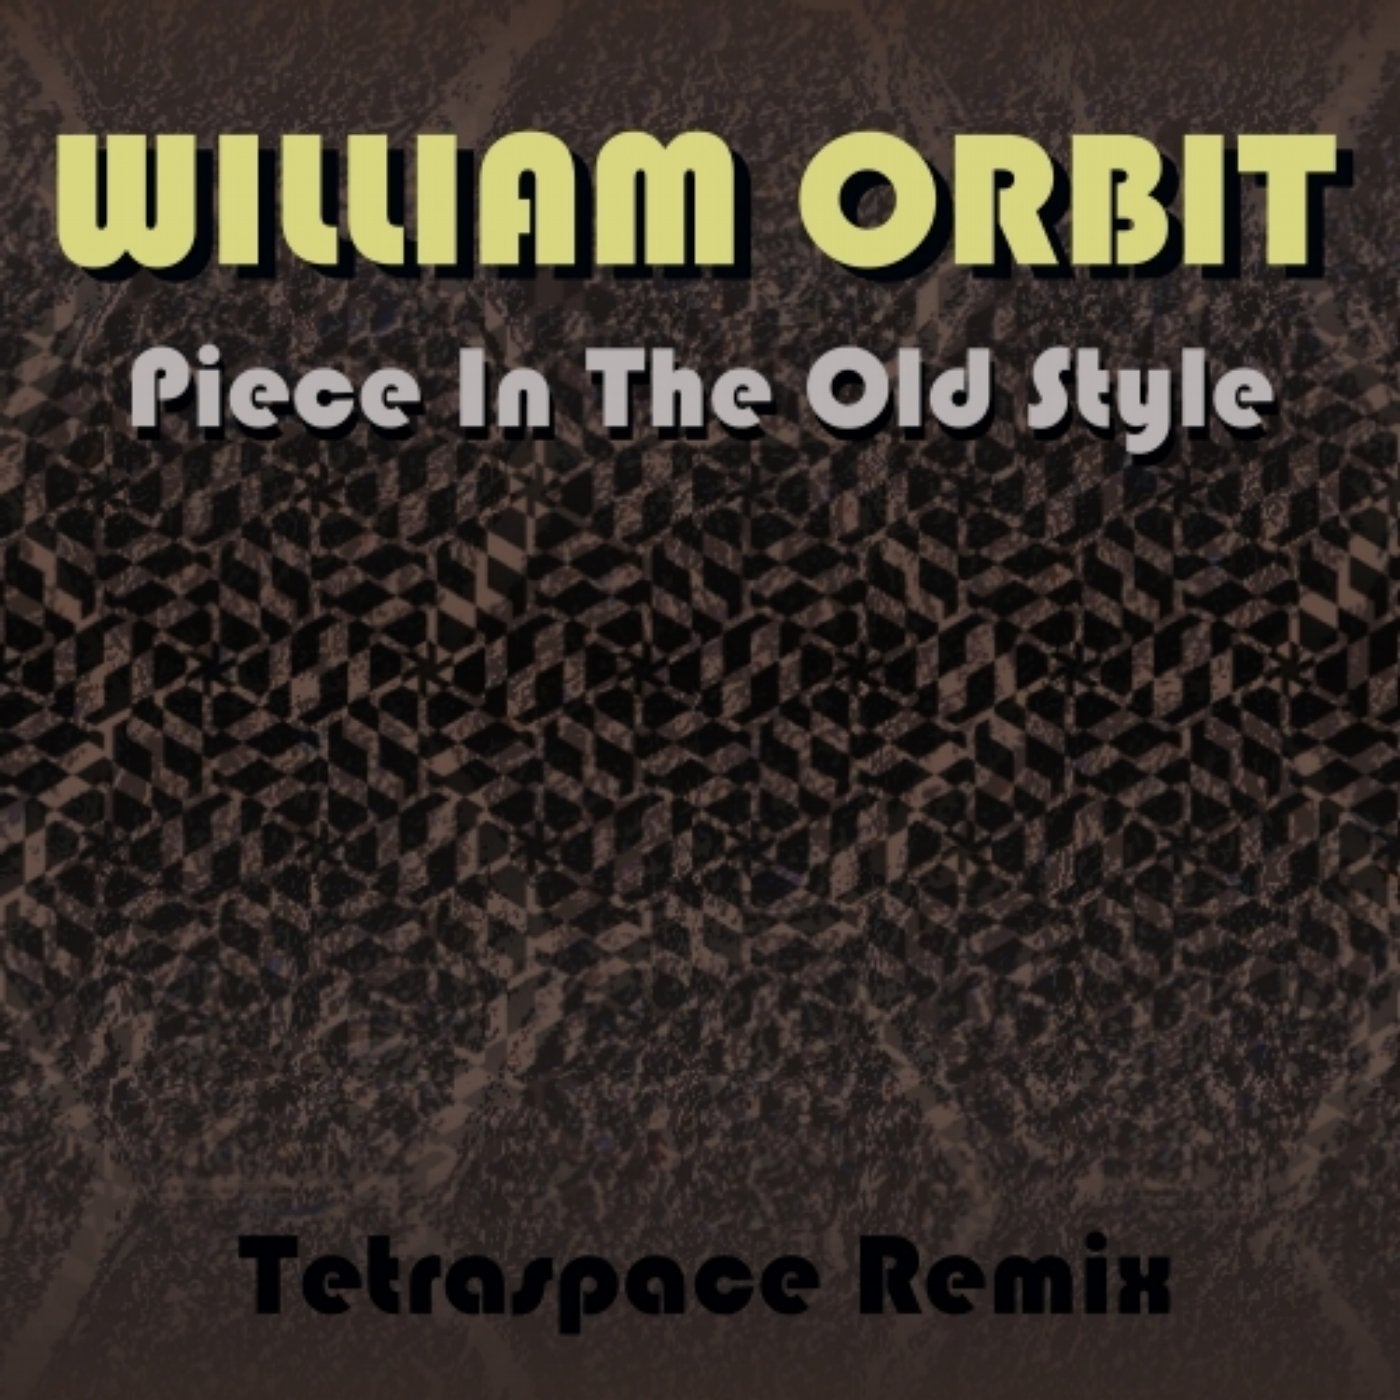 Piece In The Old Style (Tetraspace Remix)